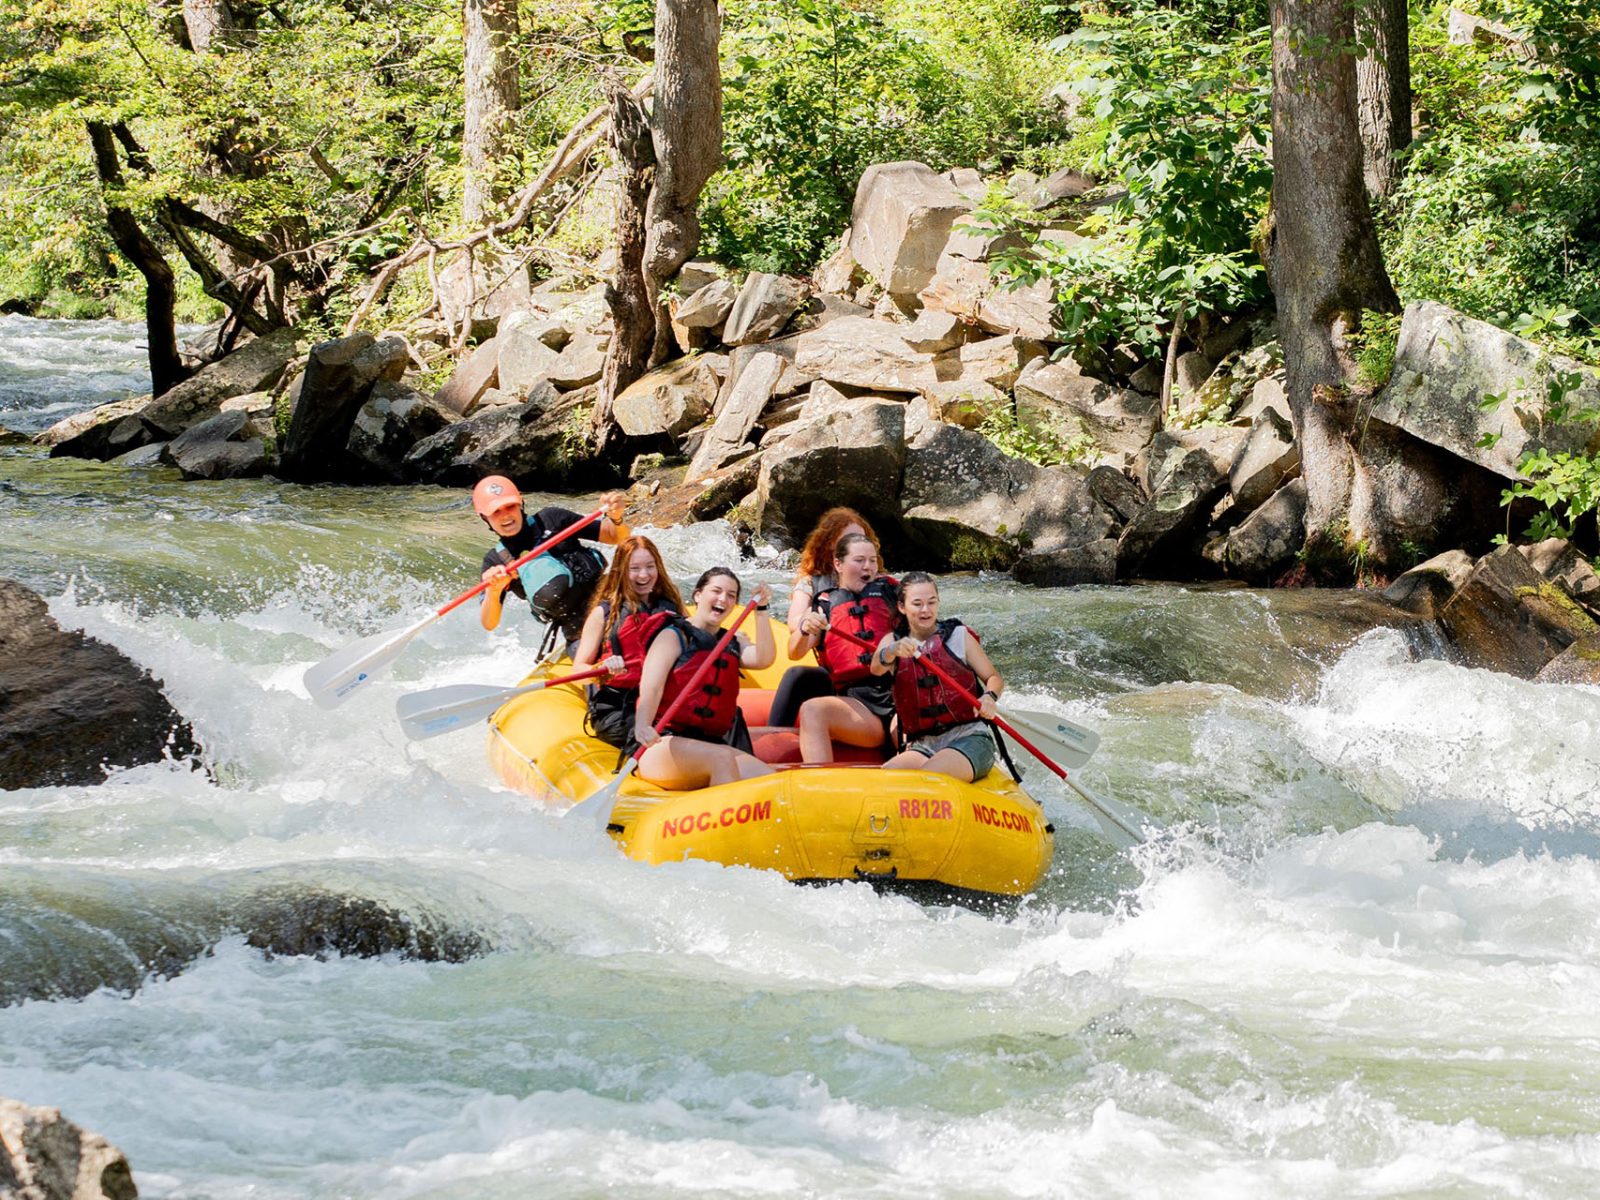 a group of people in a raft on a river